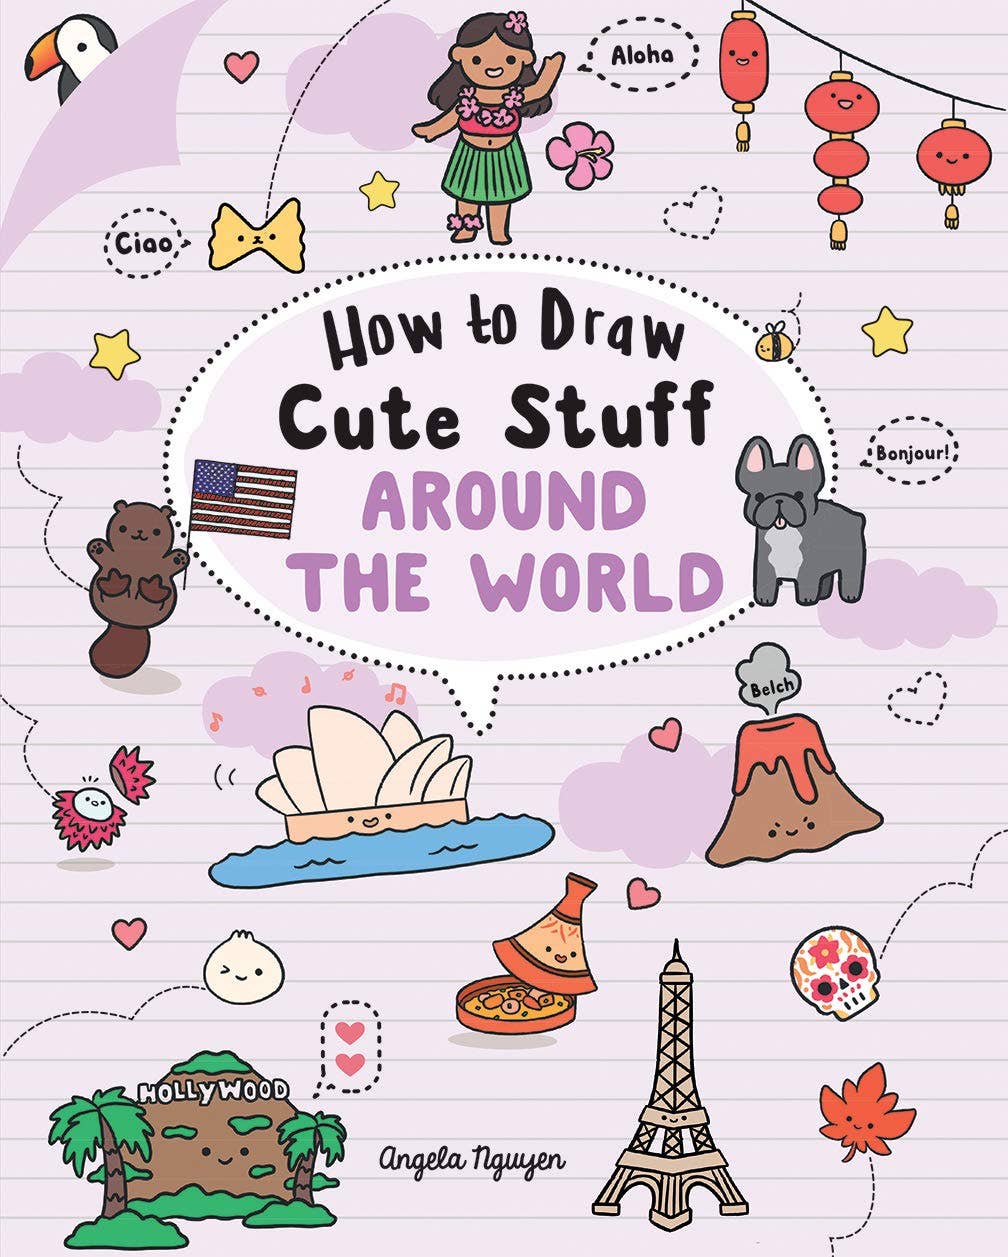 How to Draw Cute Stuff: Around the World by Angela Nguyen